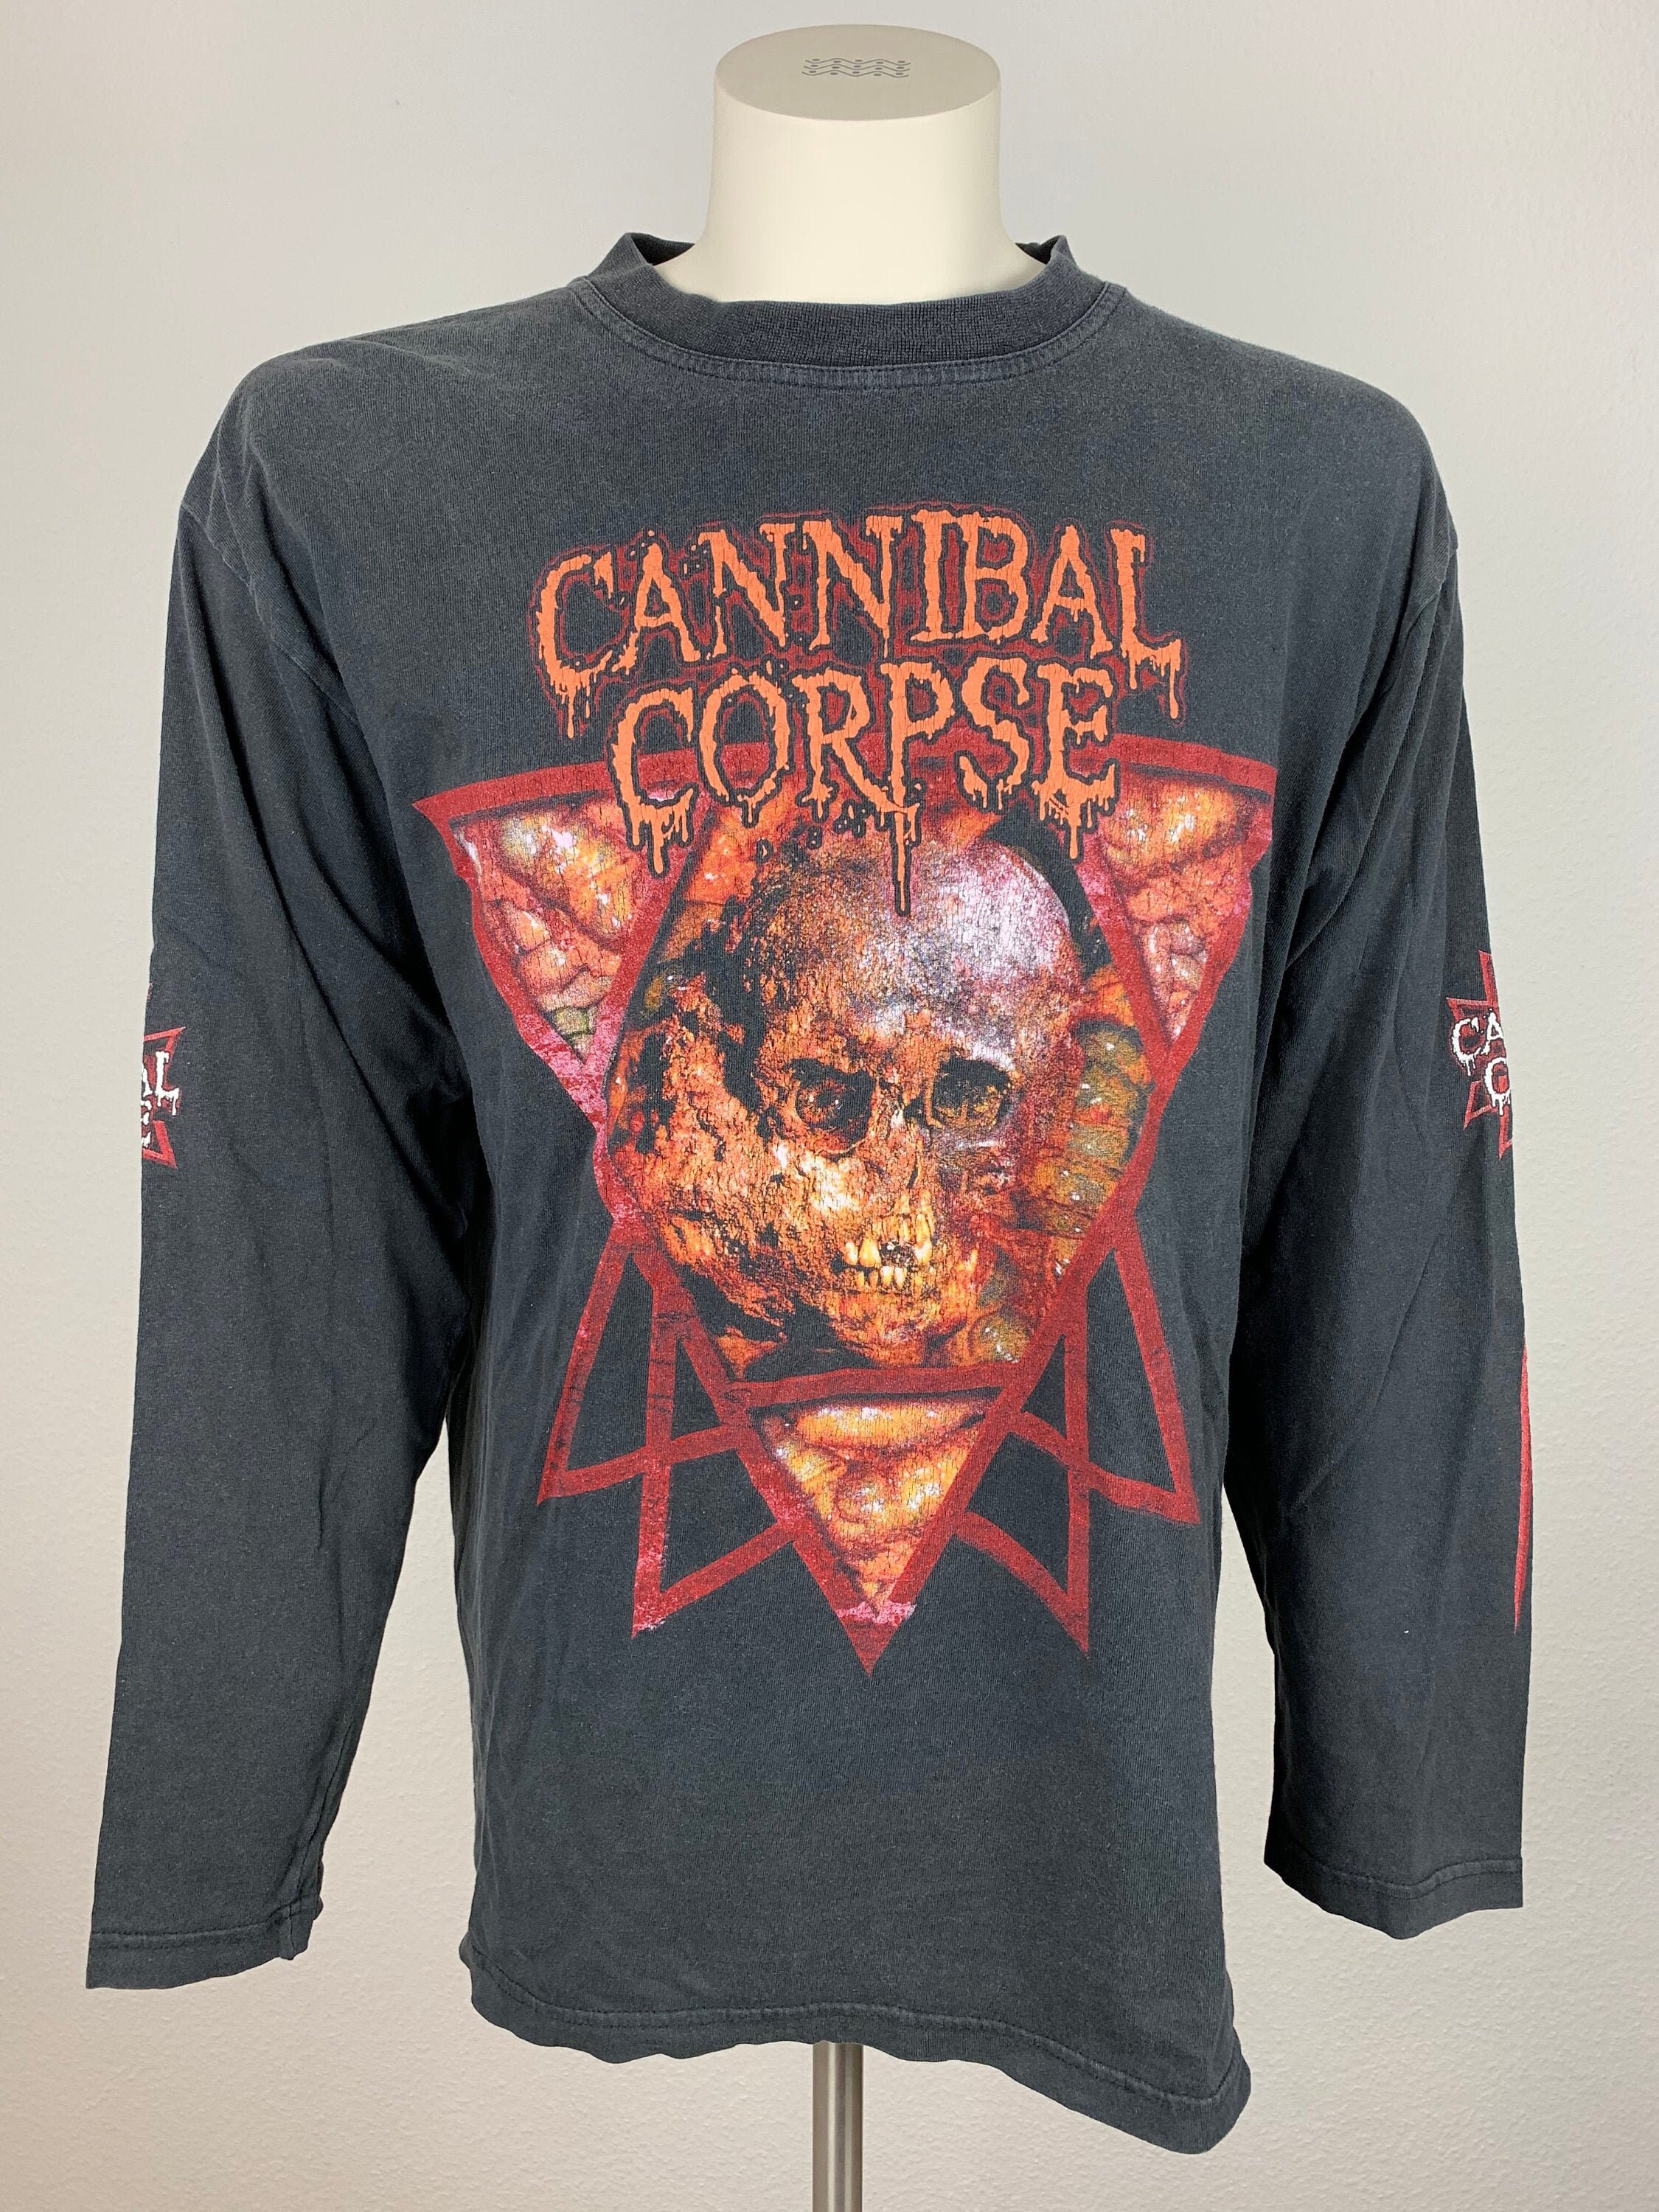 90s Cannibal Corpse Shirt - Etsy